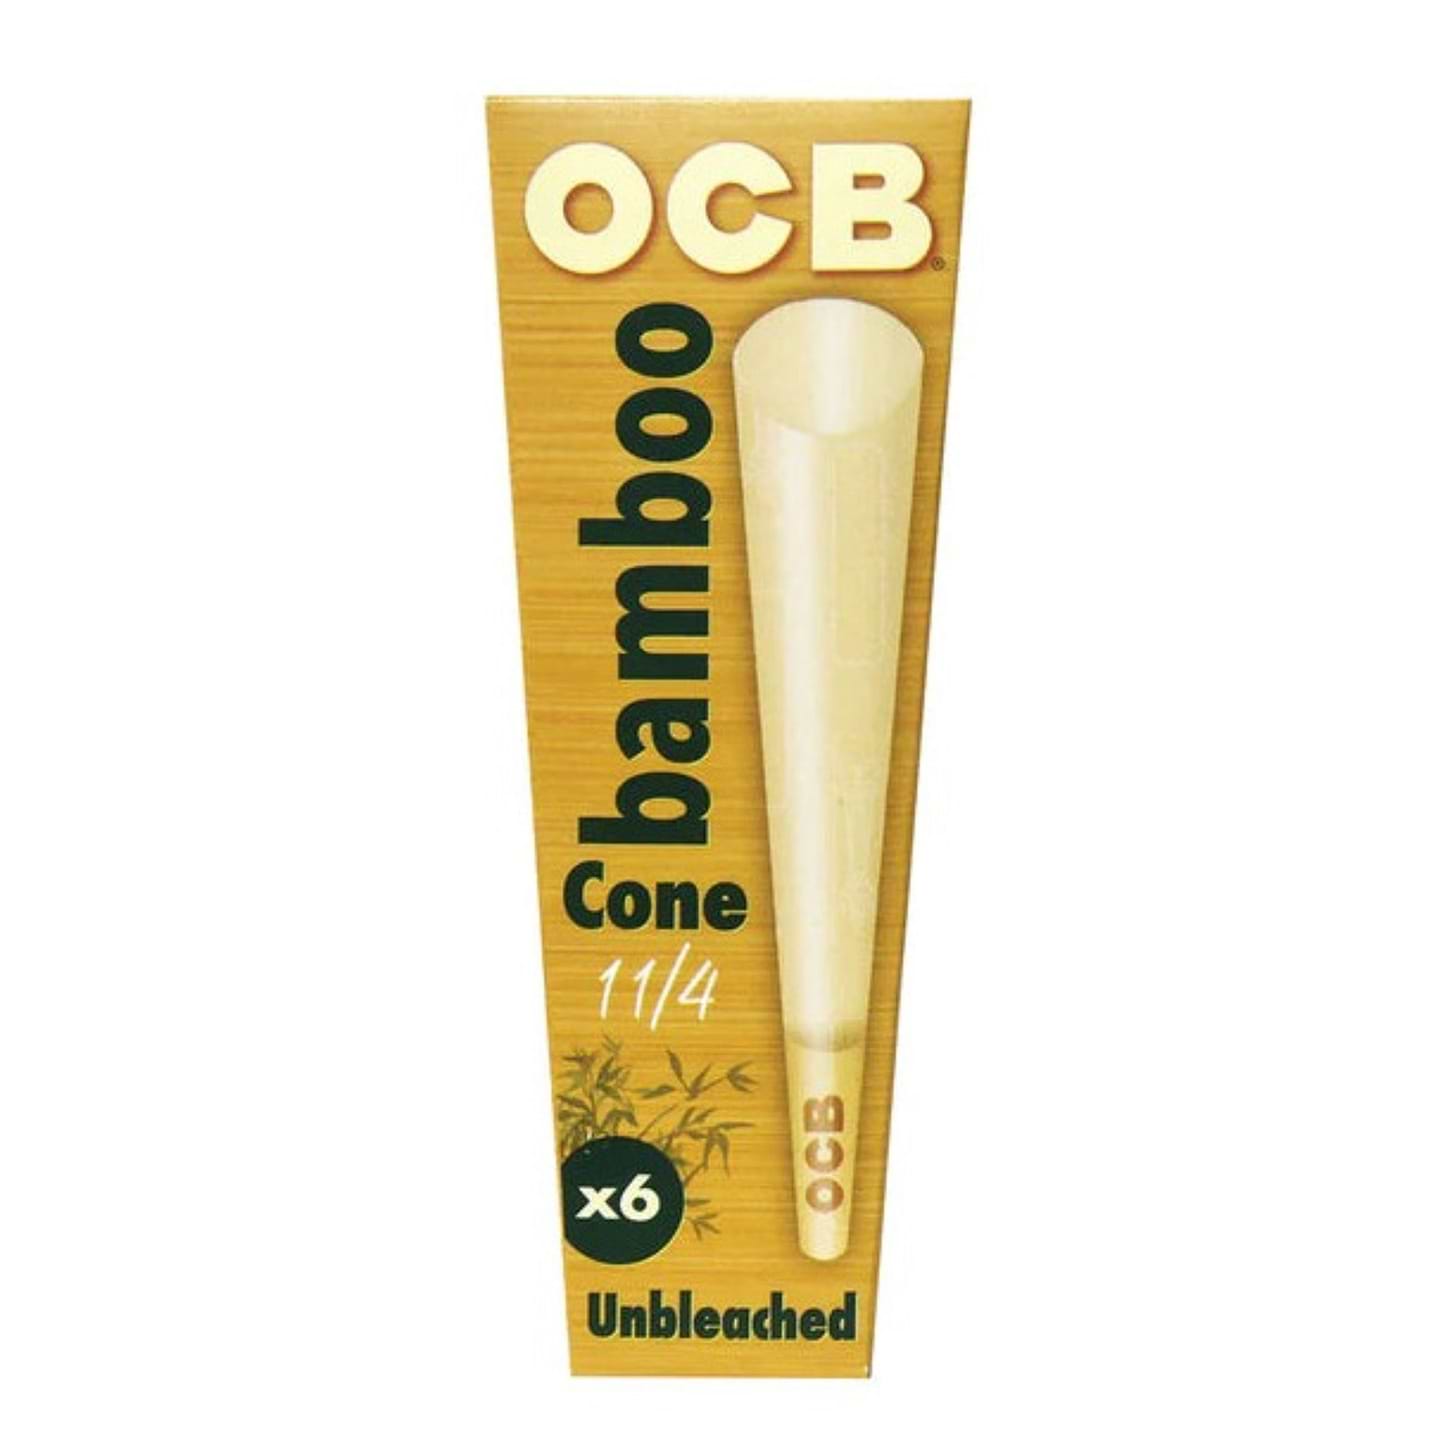 OCB Unbleached Bamboo Cones 1 1/4 (6 Pack)